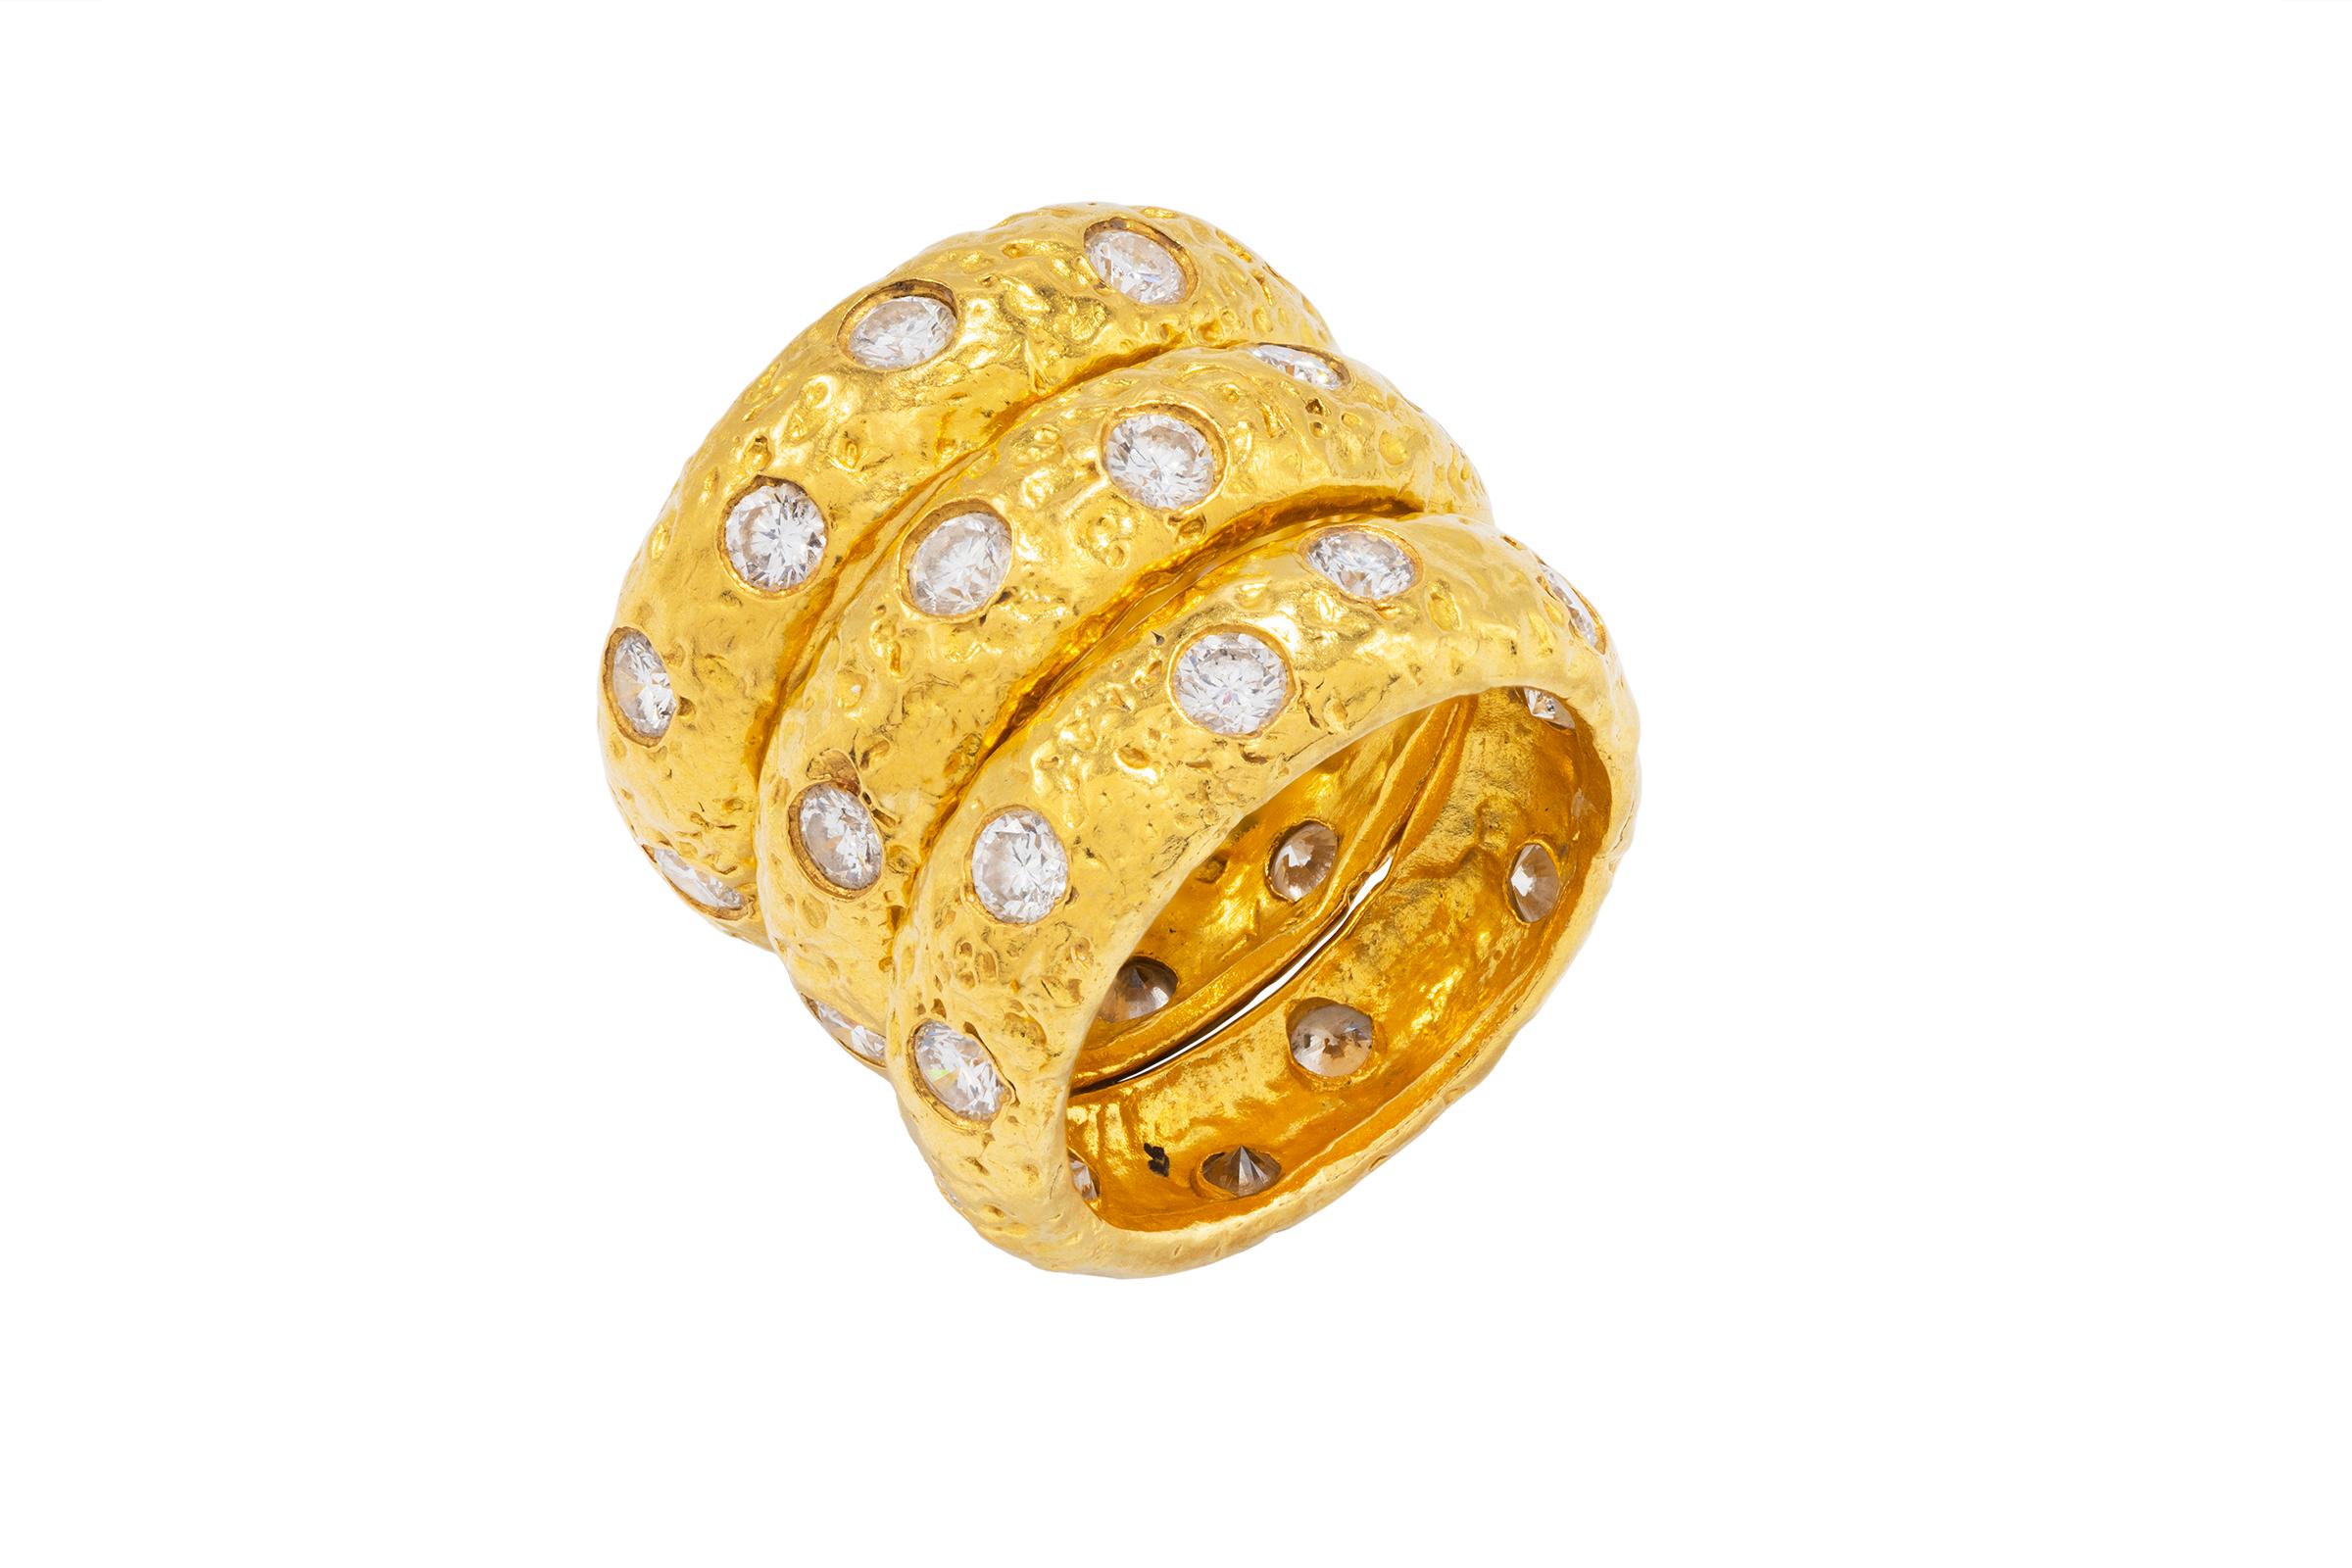 22k gold ring with diamond